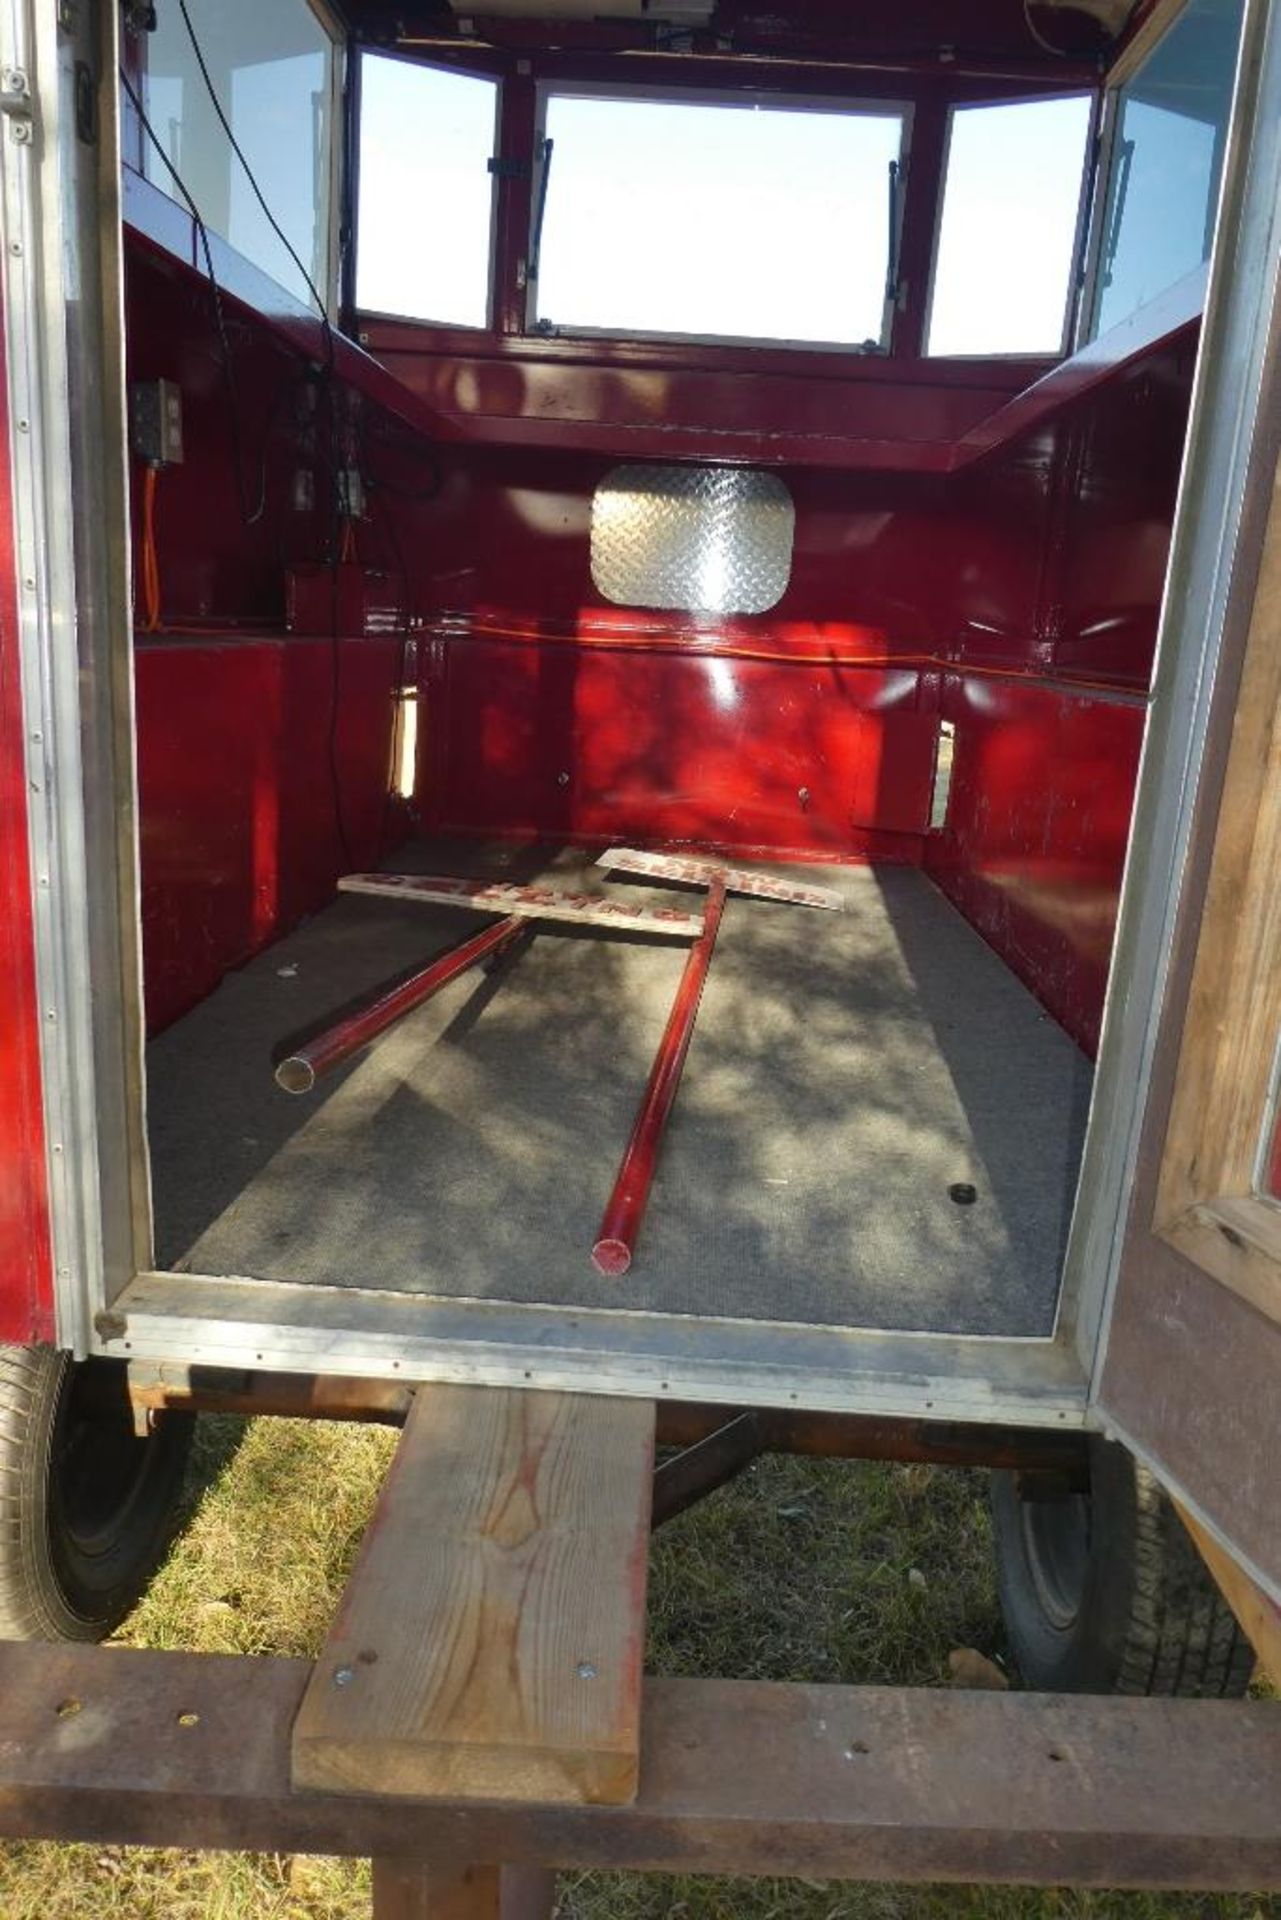 BERGEN 8' FULL VIEW AUCTION SOUND UNIT W/SPEAKERS, AMP, STANDS & PORTABLE TRAILER CART - Image 8 of 10